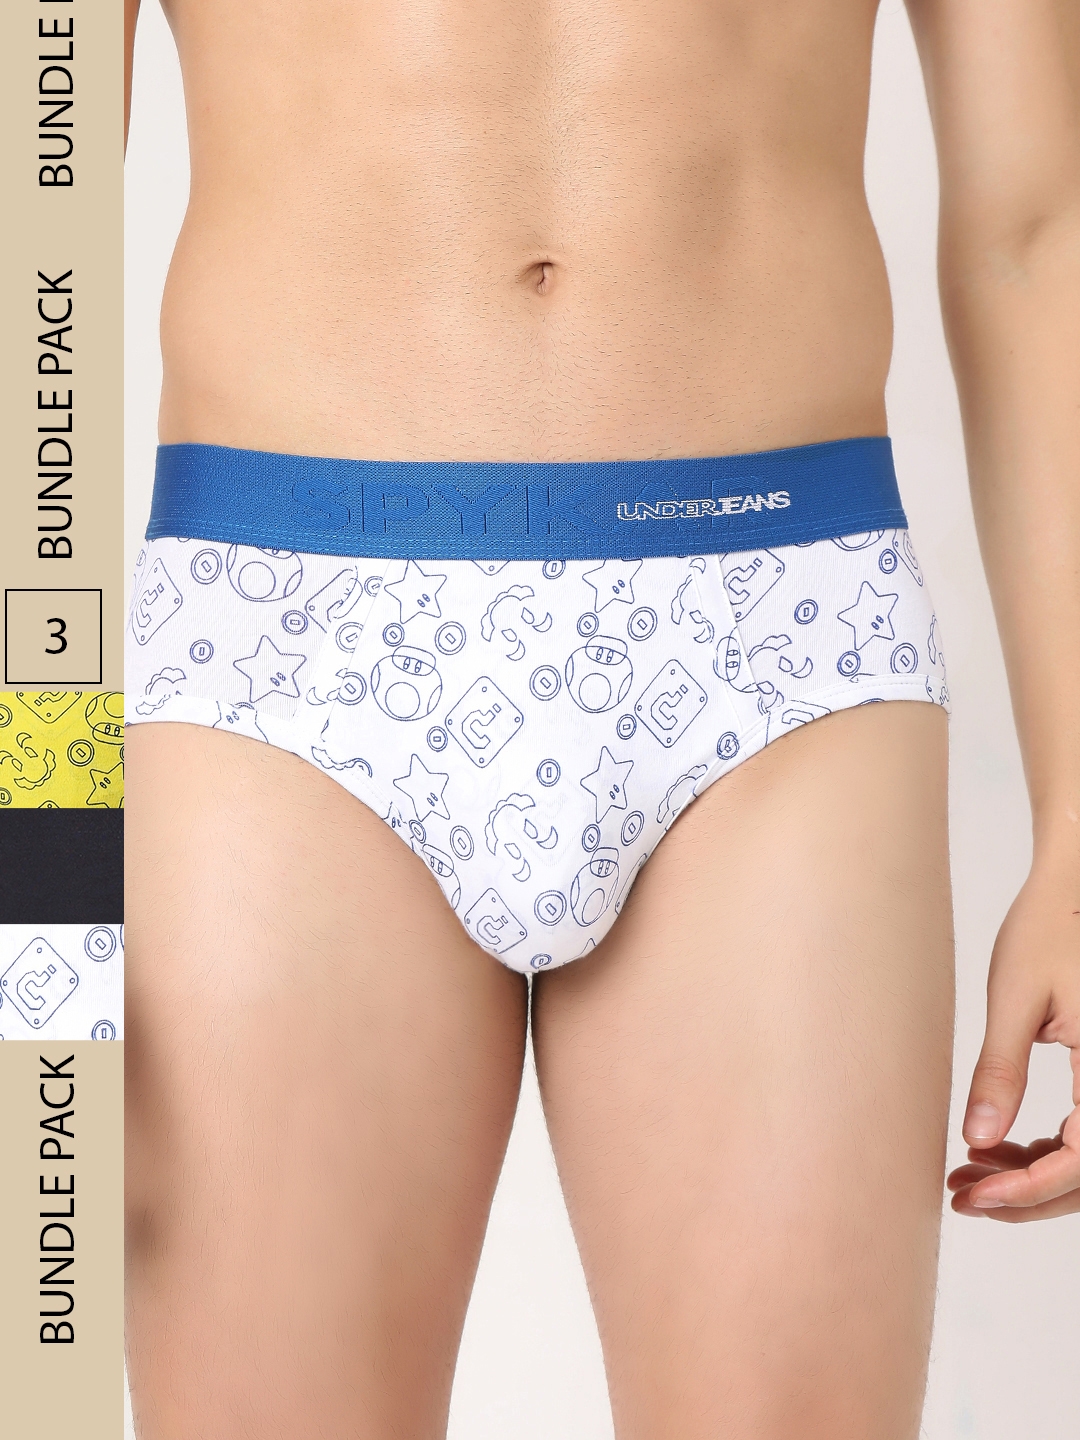 Underjeans by Spykar Premium White Yellow & Navy Cotton Blend Printed Brief - Pack Of 3